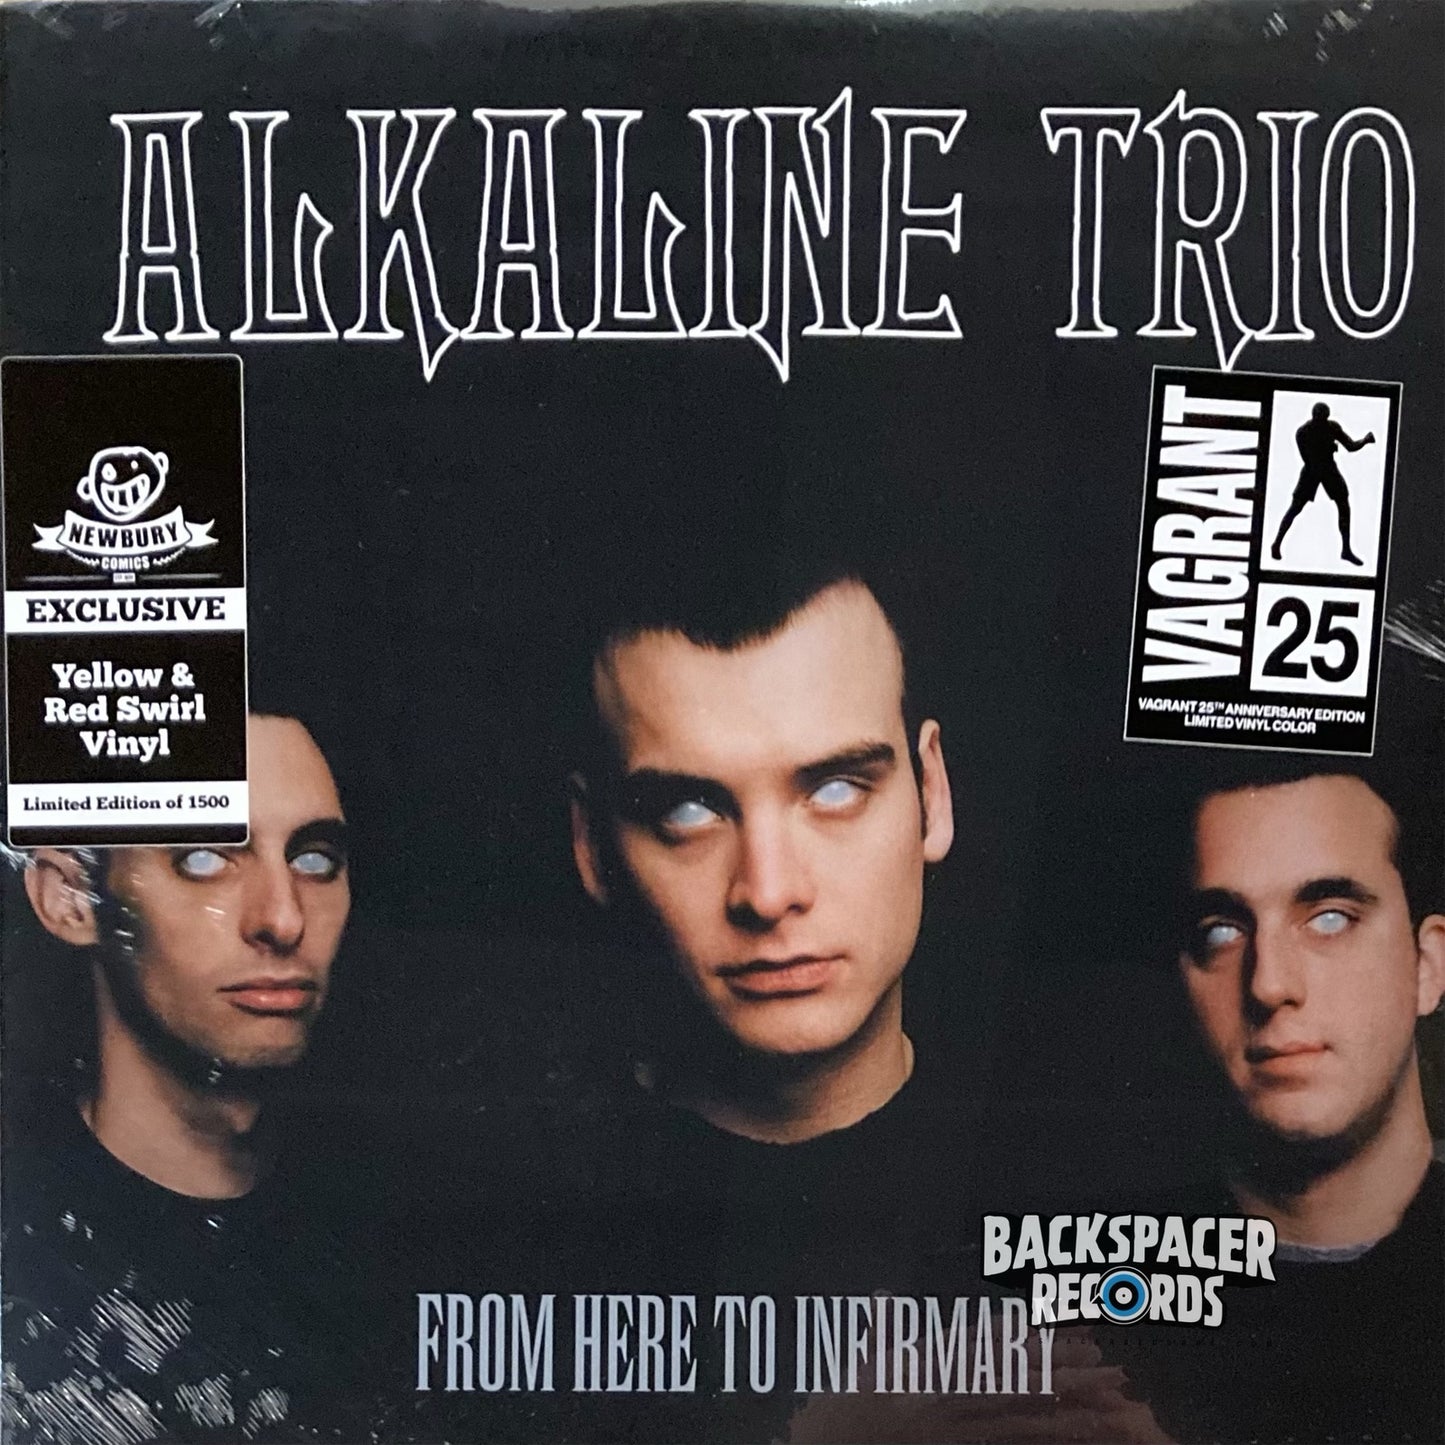 Alkaline Trio – From Here To Infirmary (Limited Edition) LP (Sealed)